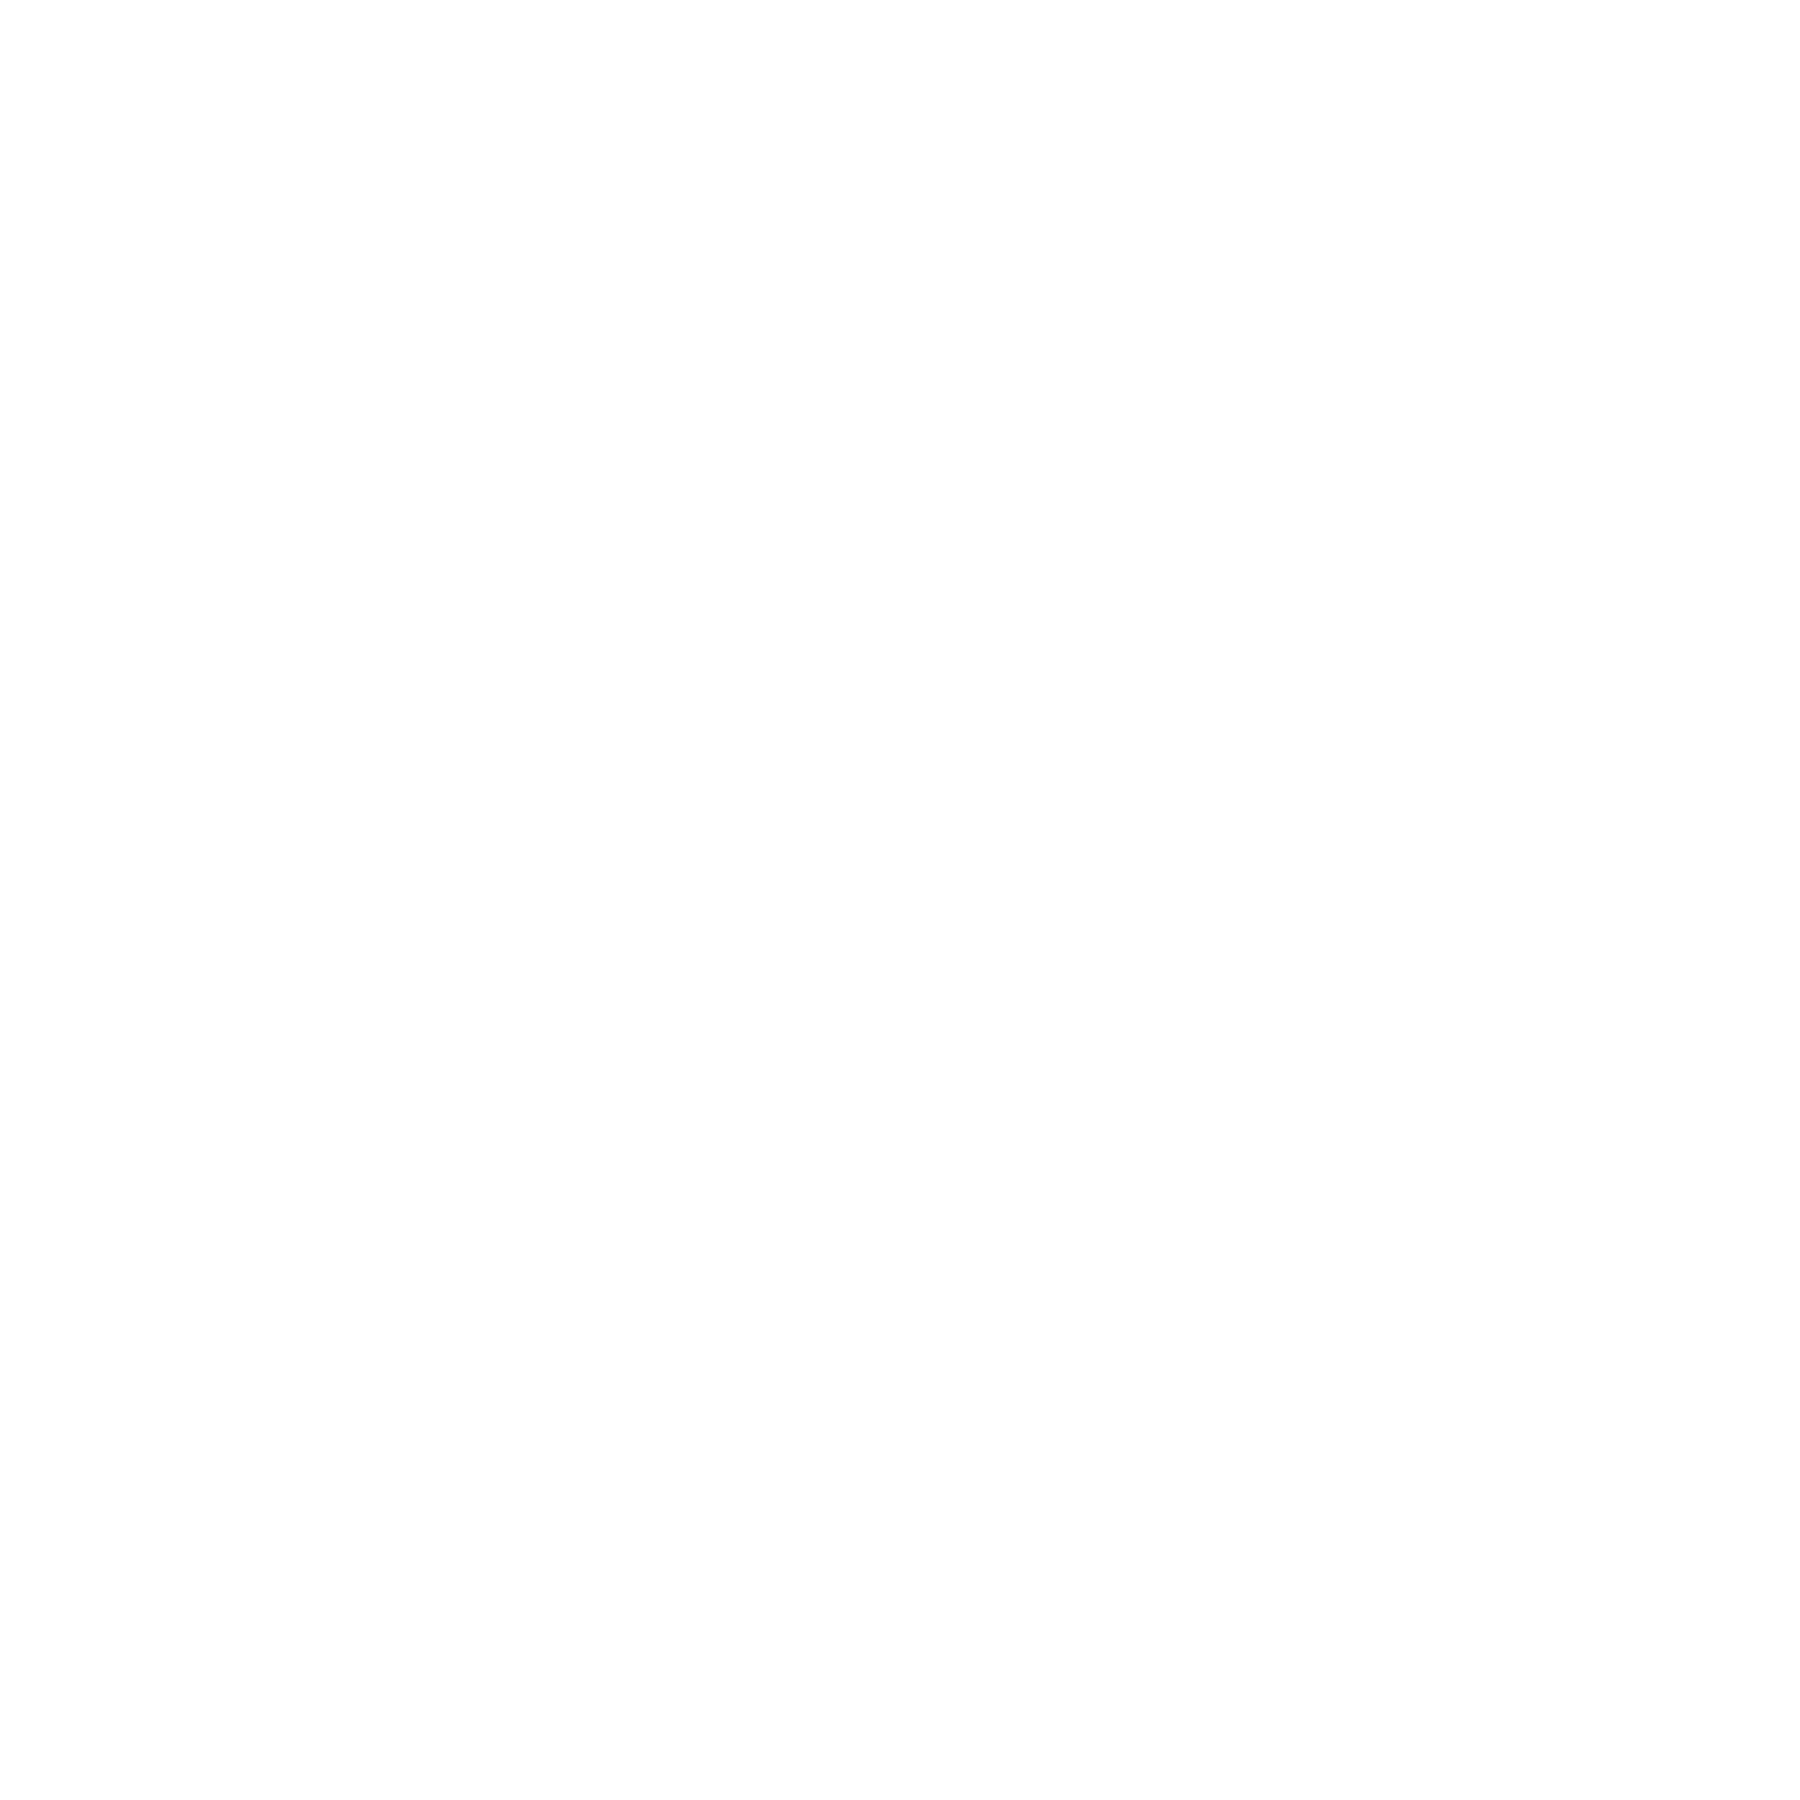 hp.png